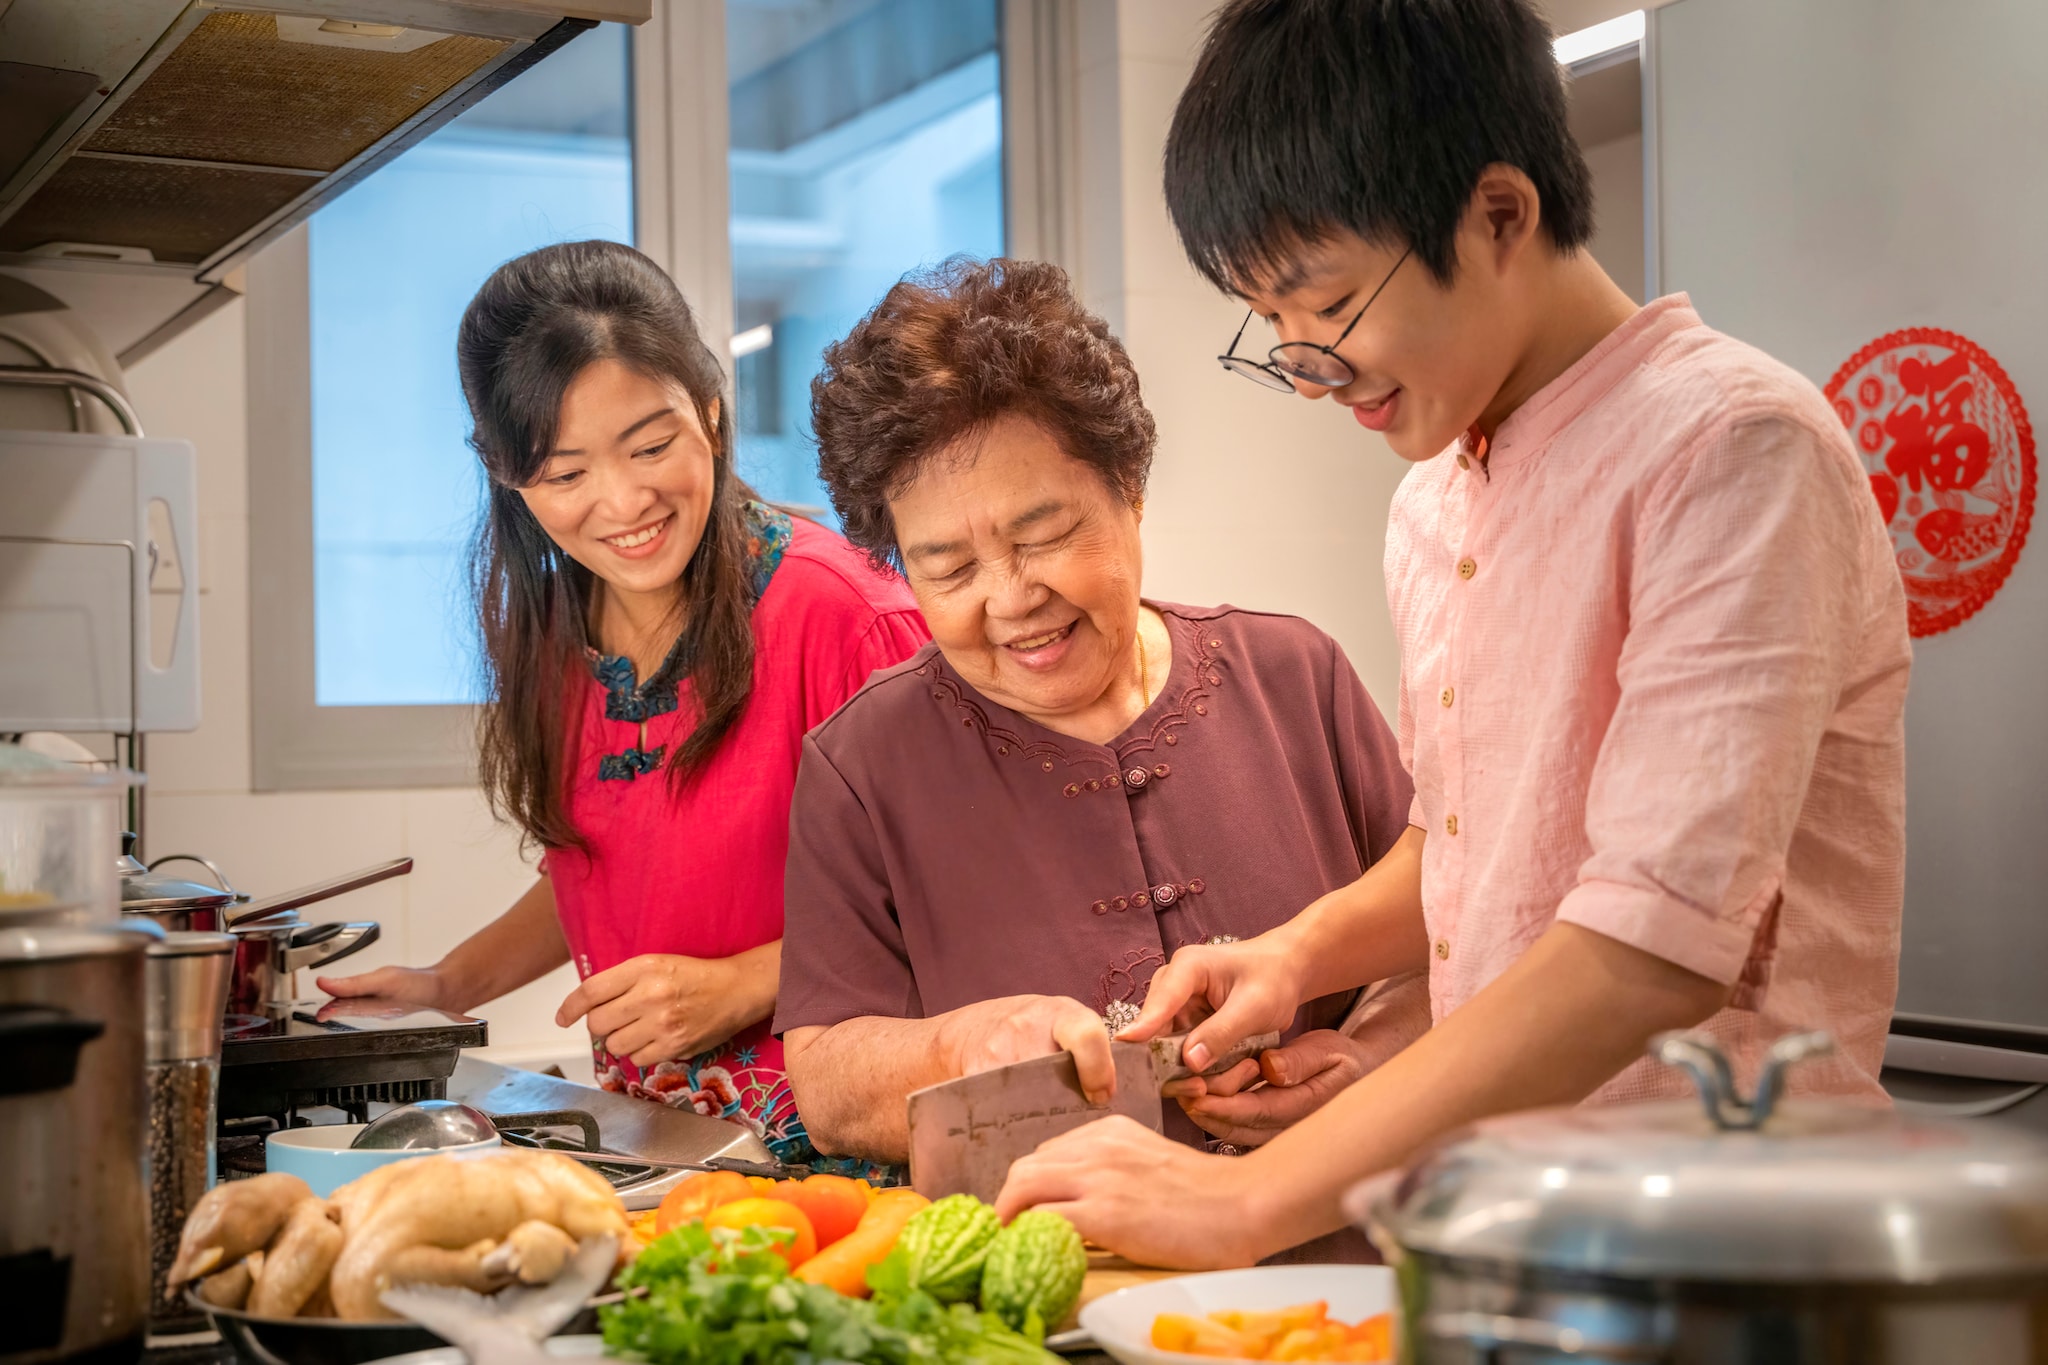 Young Asian male learning how to prepare food from his mother and grandmother.